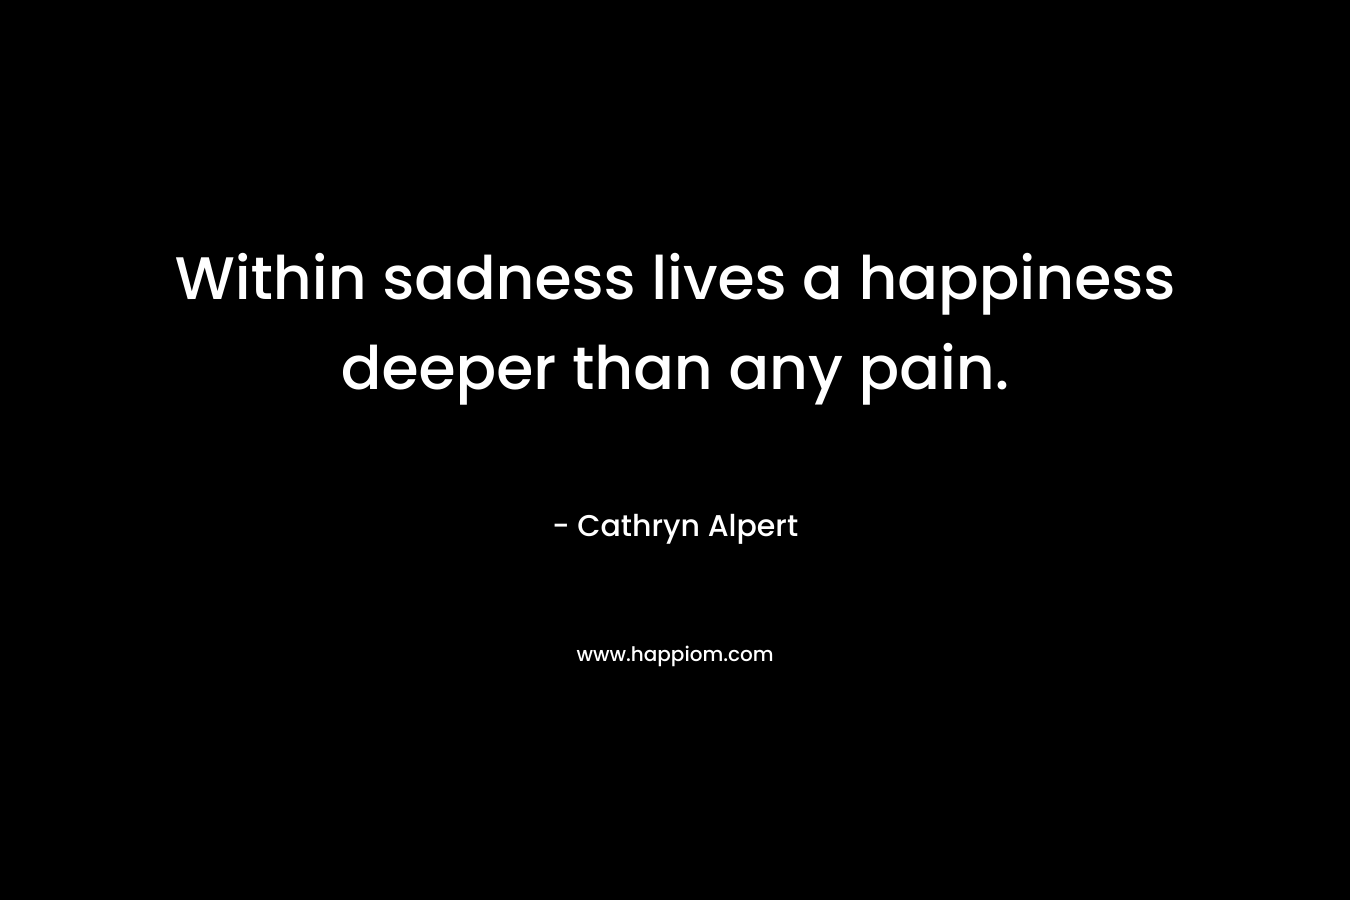 Within sadness lives a happiness deeper than any pain. – Cathryn Alpert